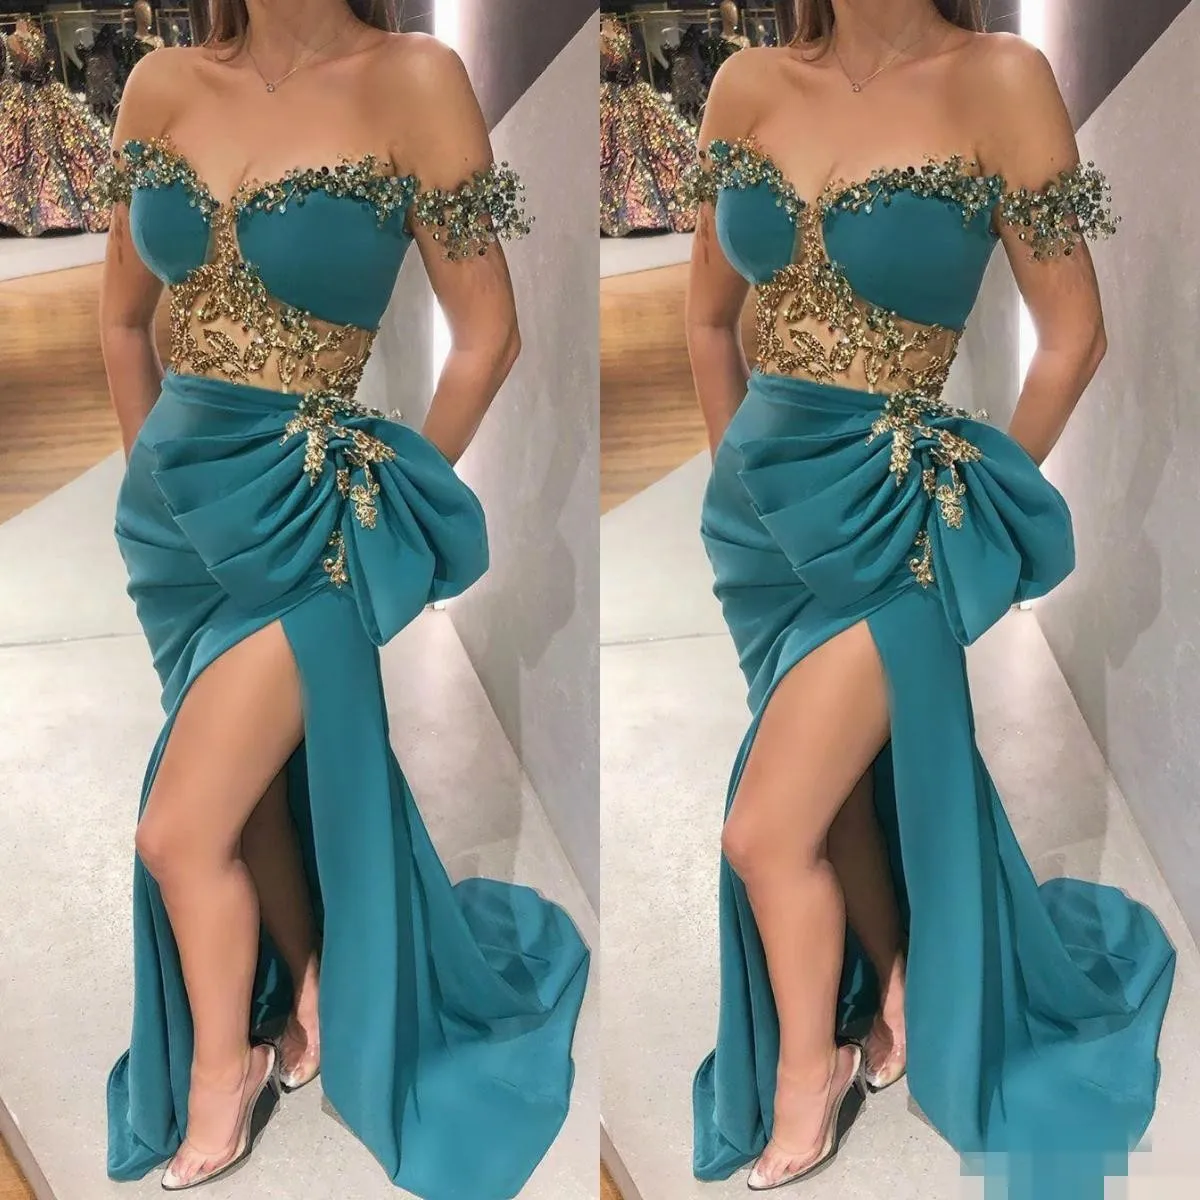 peacock Ladies Peacock Masquerade Party Evening Prom Gowns Bridesmaid Dress  hot | eBay